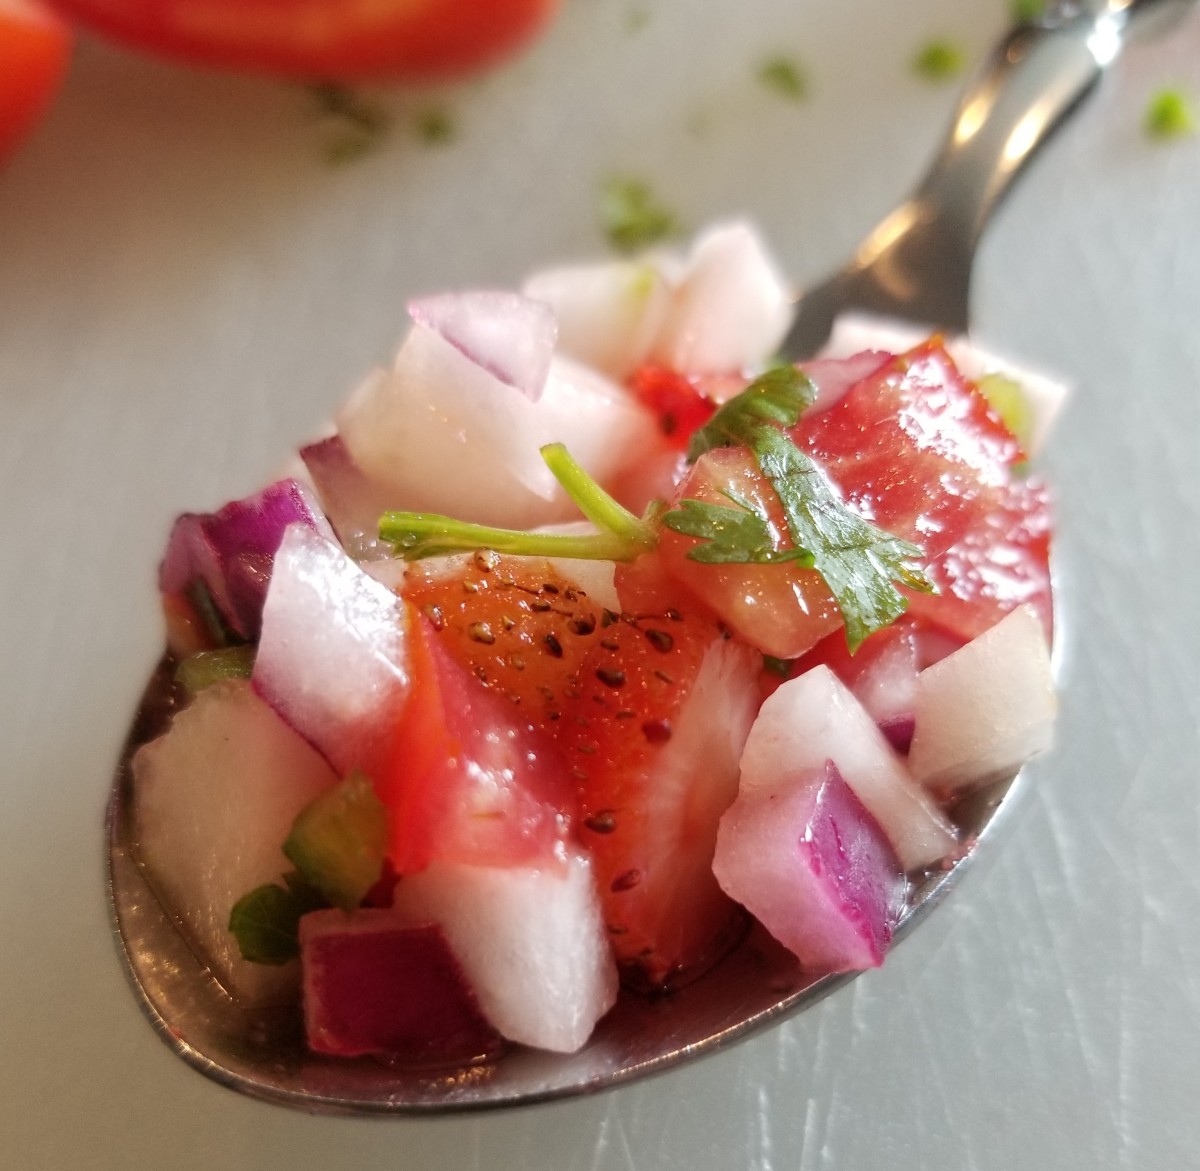 It may sound unusual, but cucumber strawberry salsa is delicious!